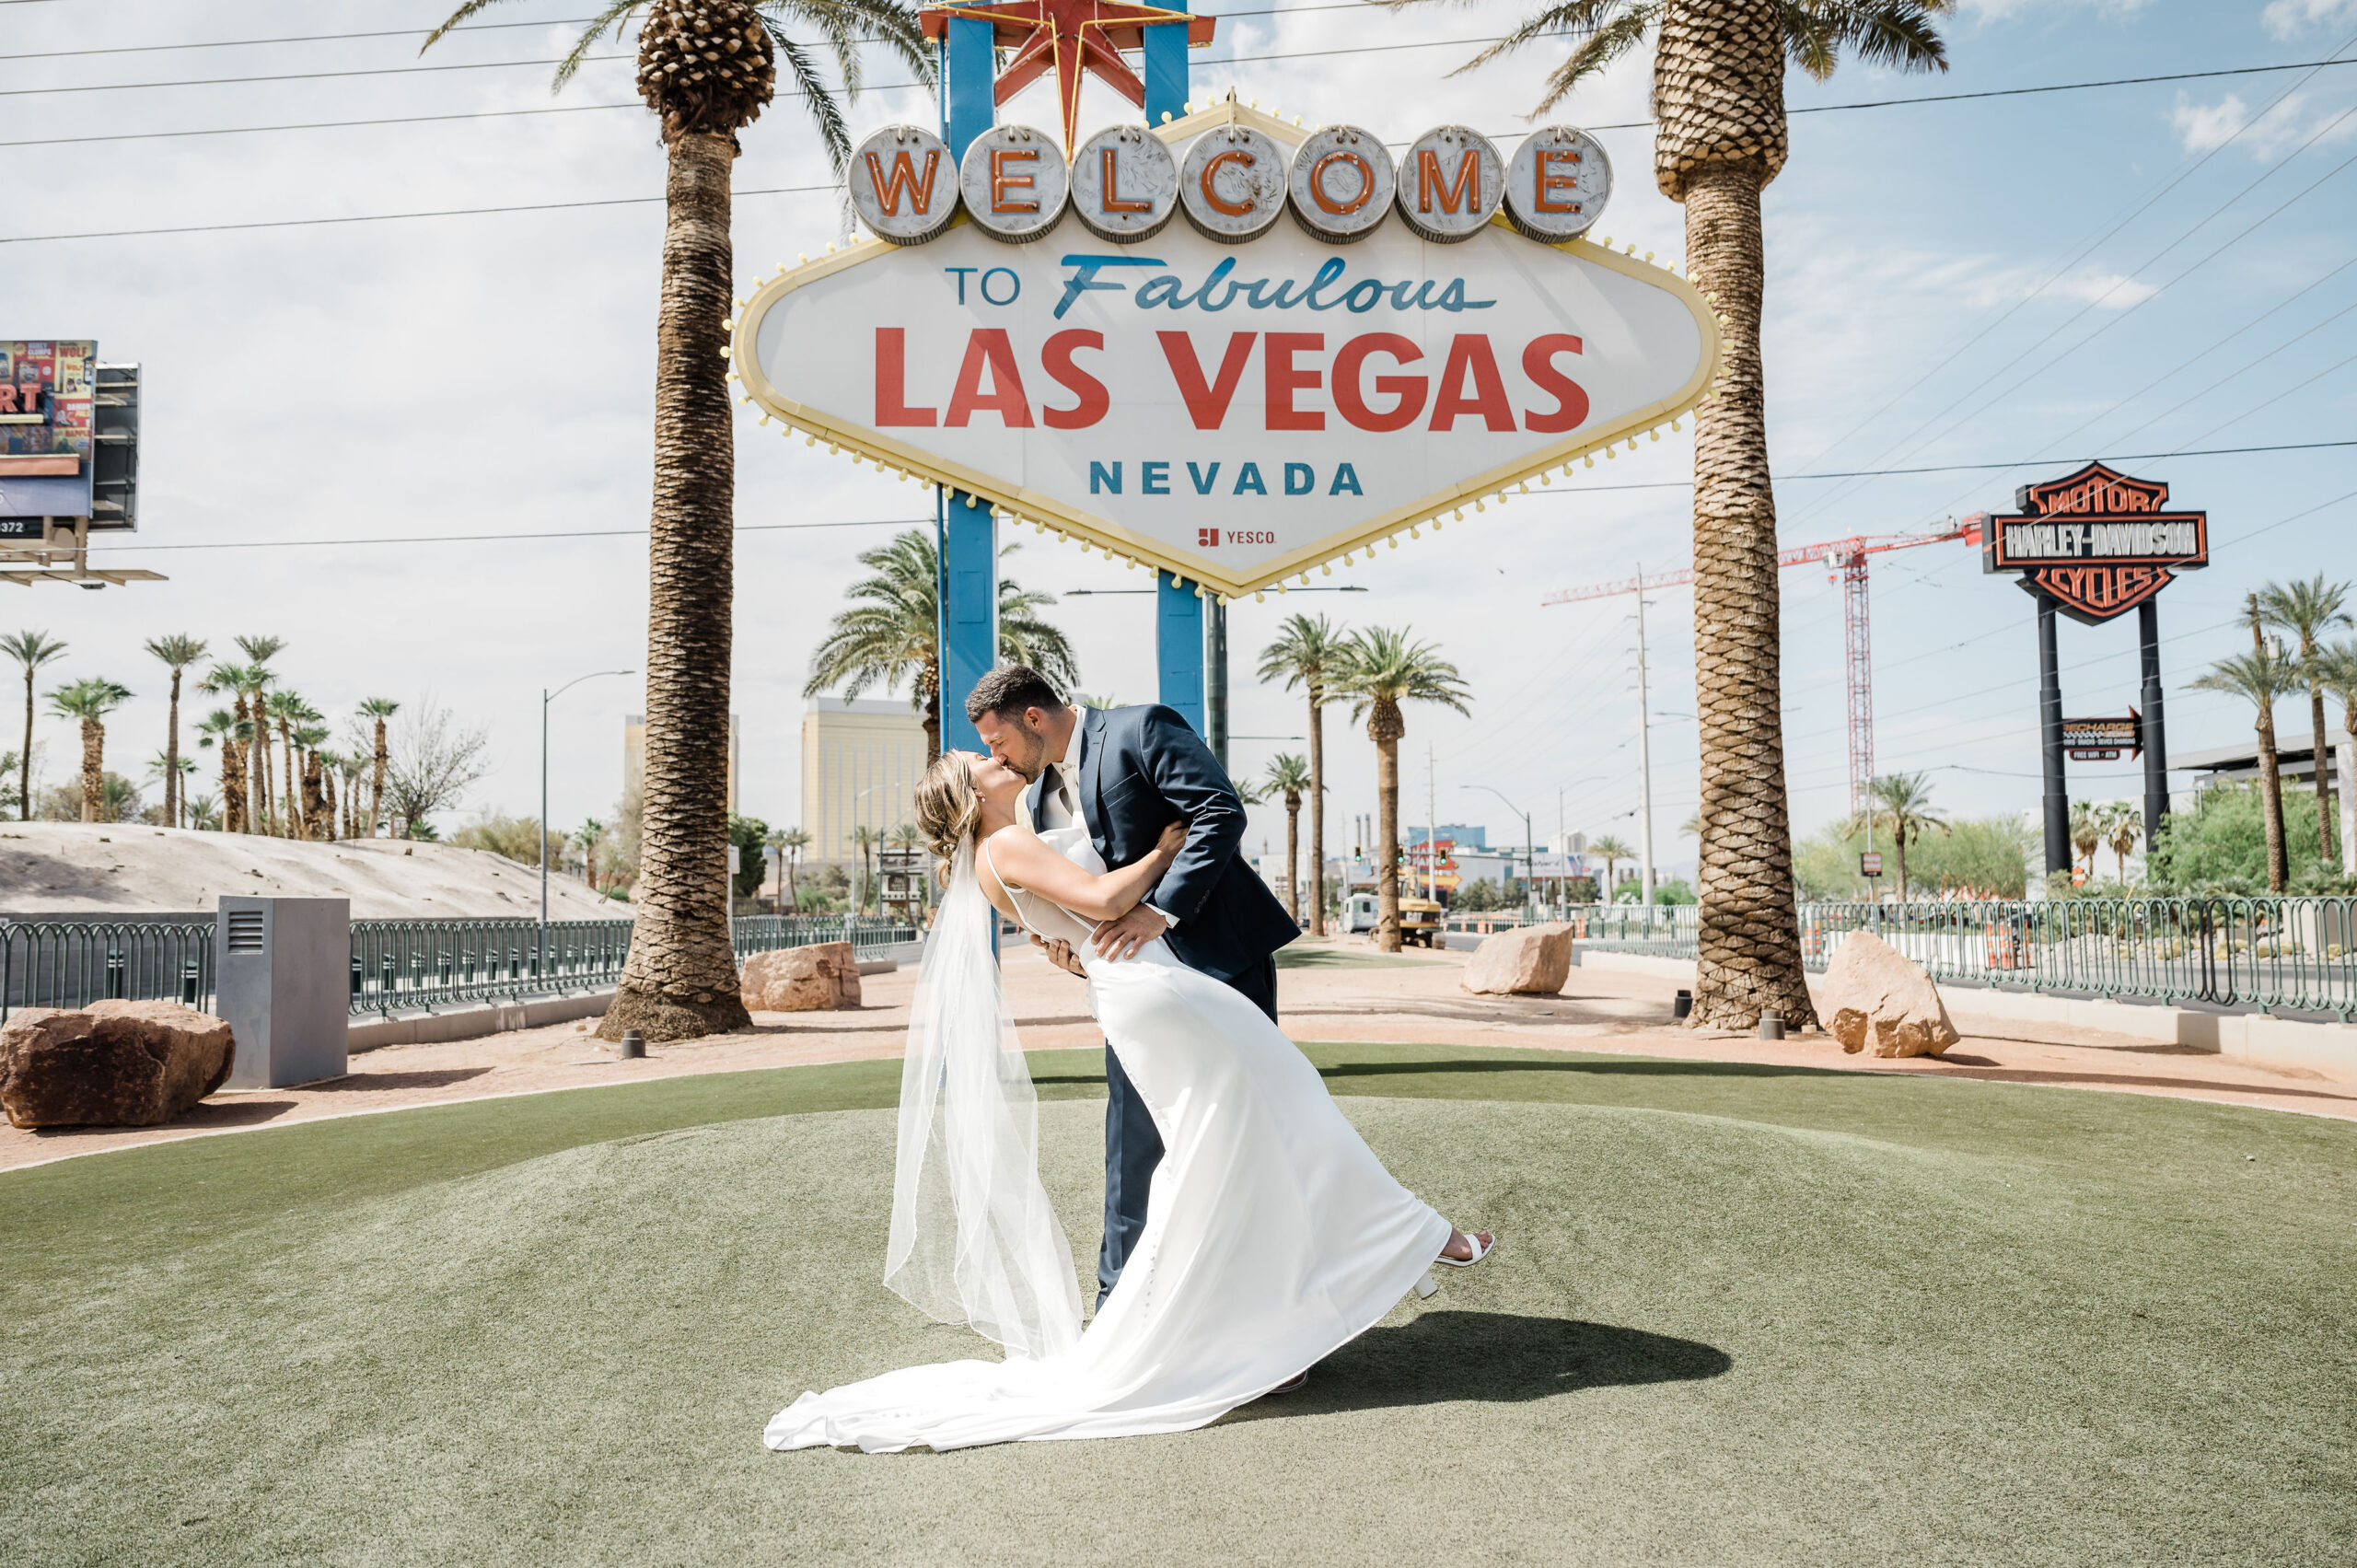 What Documents Do I Need To Get Married In Vegas? Bride and groom sharing a kiss in front of Las Vegas welcome sign.